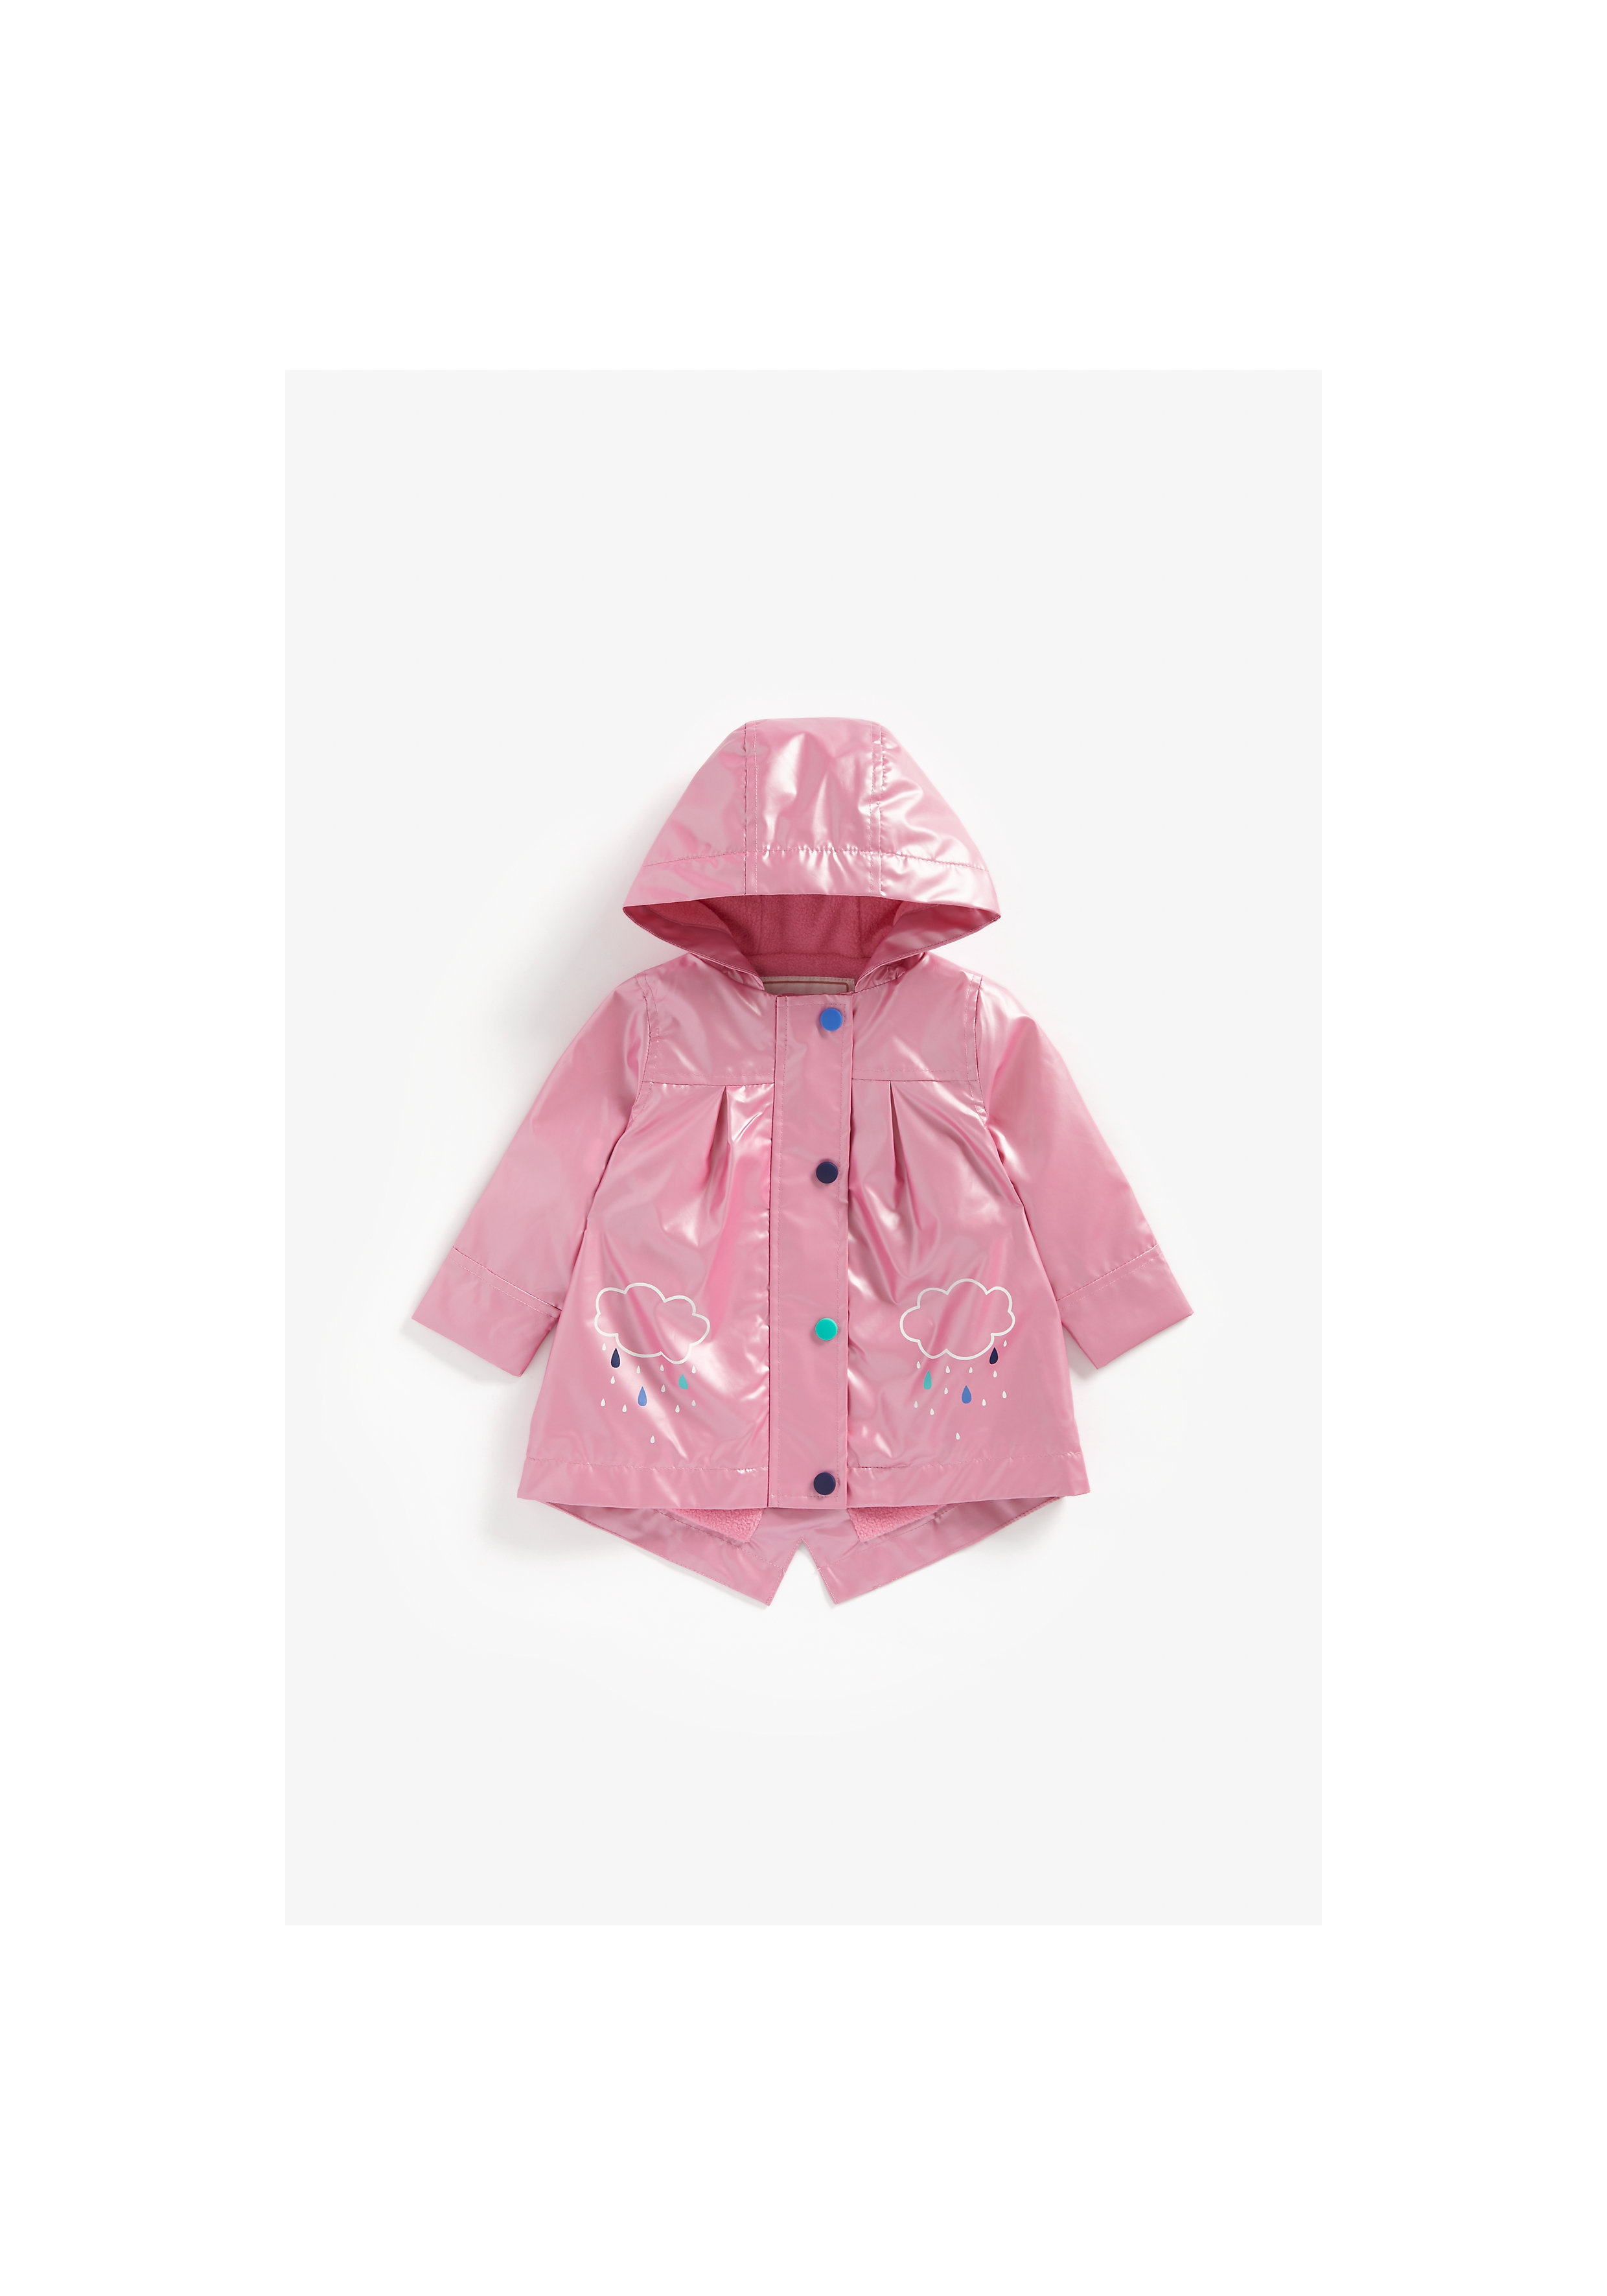 Mothercare | Girls Full Sleeves Rubberized Coat Jersey Lined - Pink 0